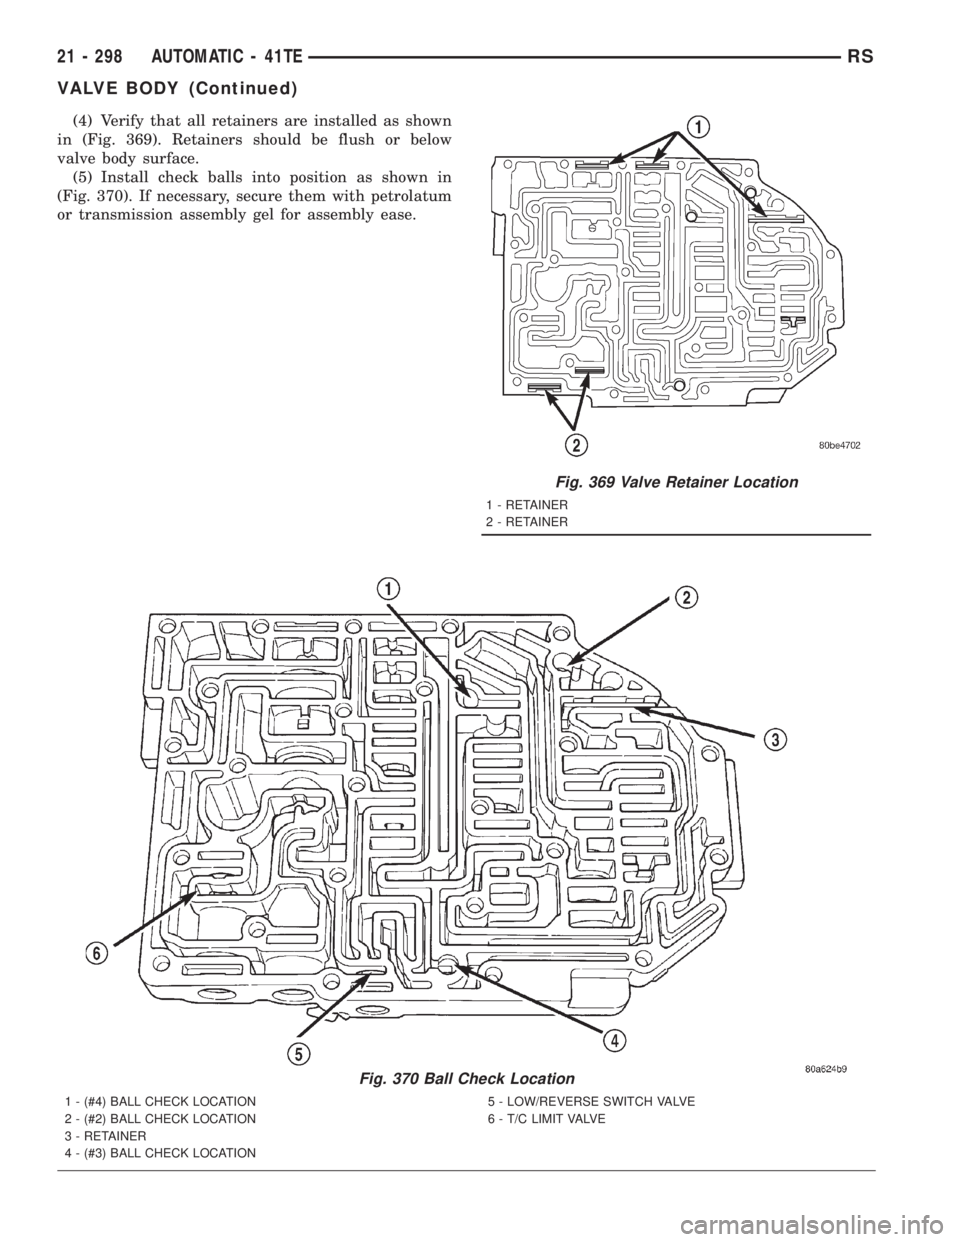 CHRYSLER VOYAGER 2001  Service Manual (4) Verify that all retainers are installed as shown
in (Fig. 369). Retainers should be flush or below
valve body surface.
(5) Install check balls into position as shown in
(Fig. 370). If necessary, s